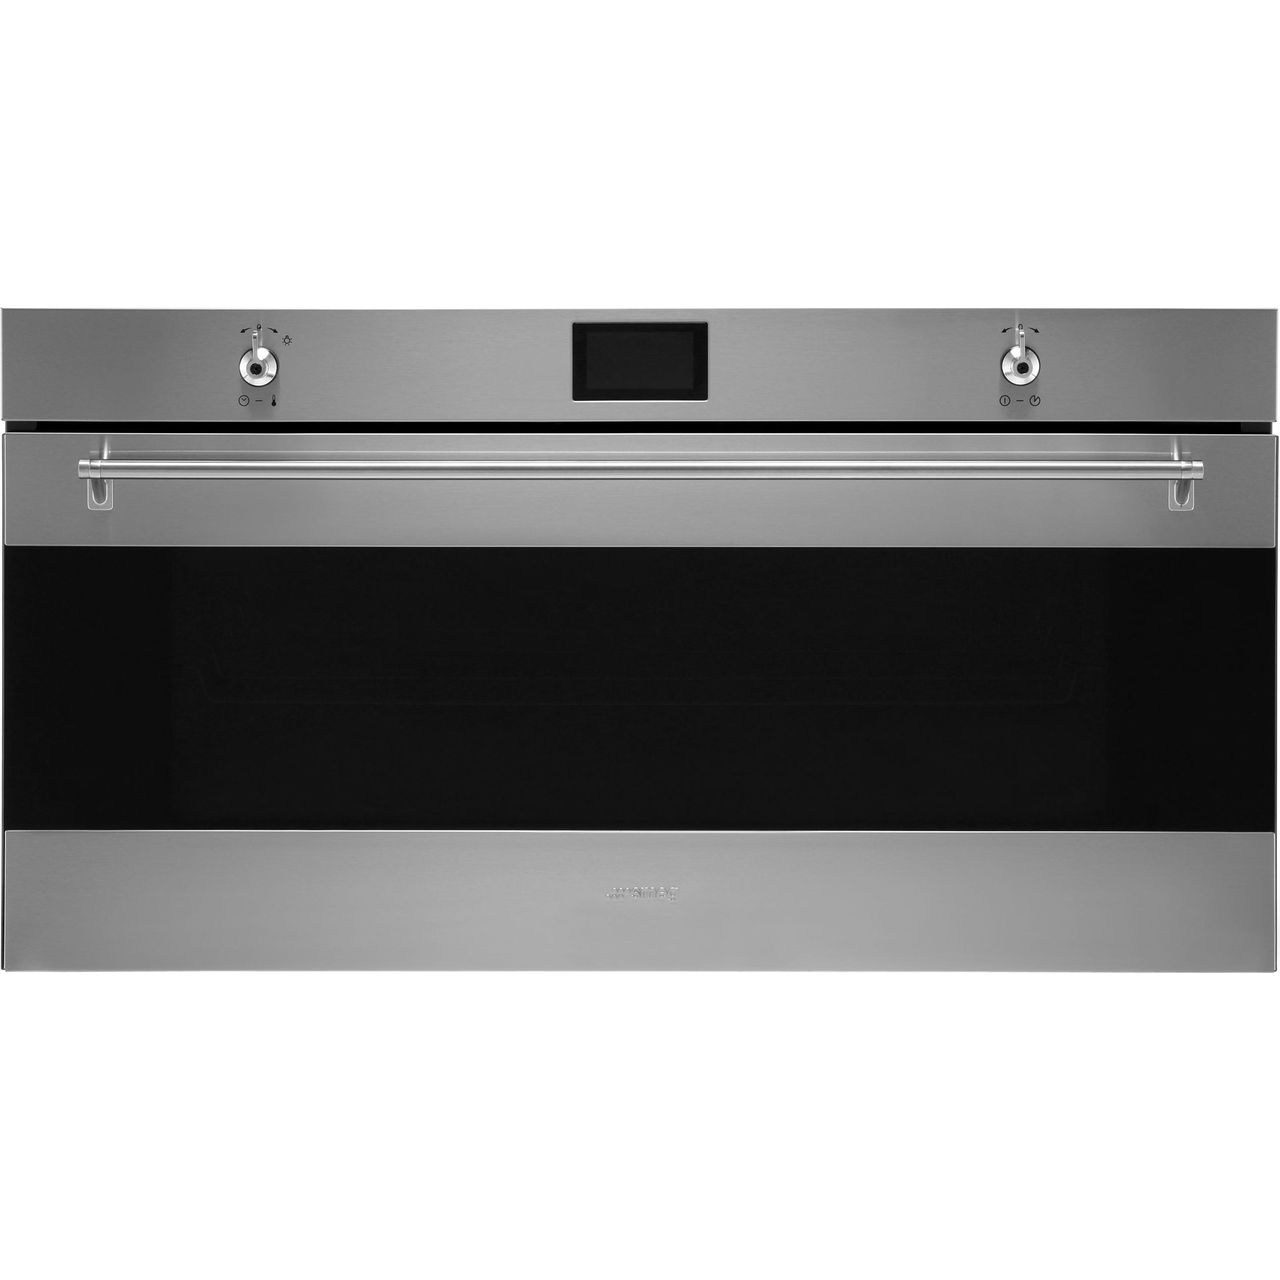 Smeg Classic SFR9390X Built In Compact Electric Single Oven Review